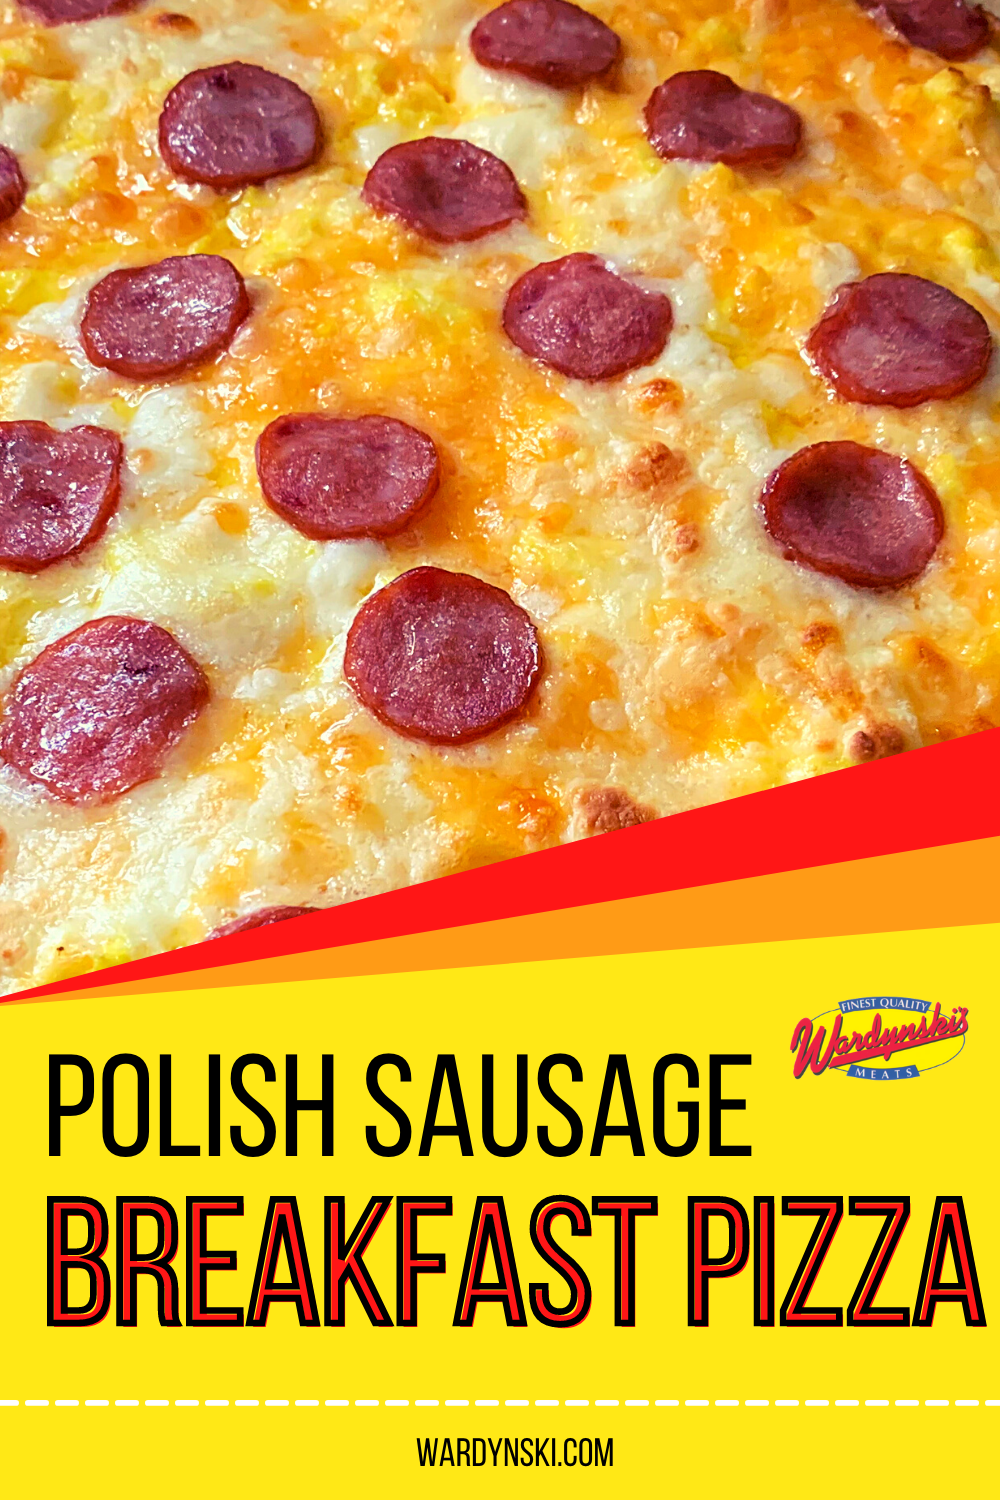 This breakfast pizza recipe uses Polish sausage, eggs and cheese to make an easy breakfast. Try out Polish Breakfast Pizza for your next brunch!